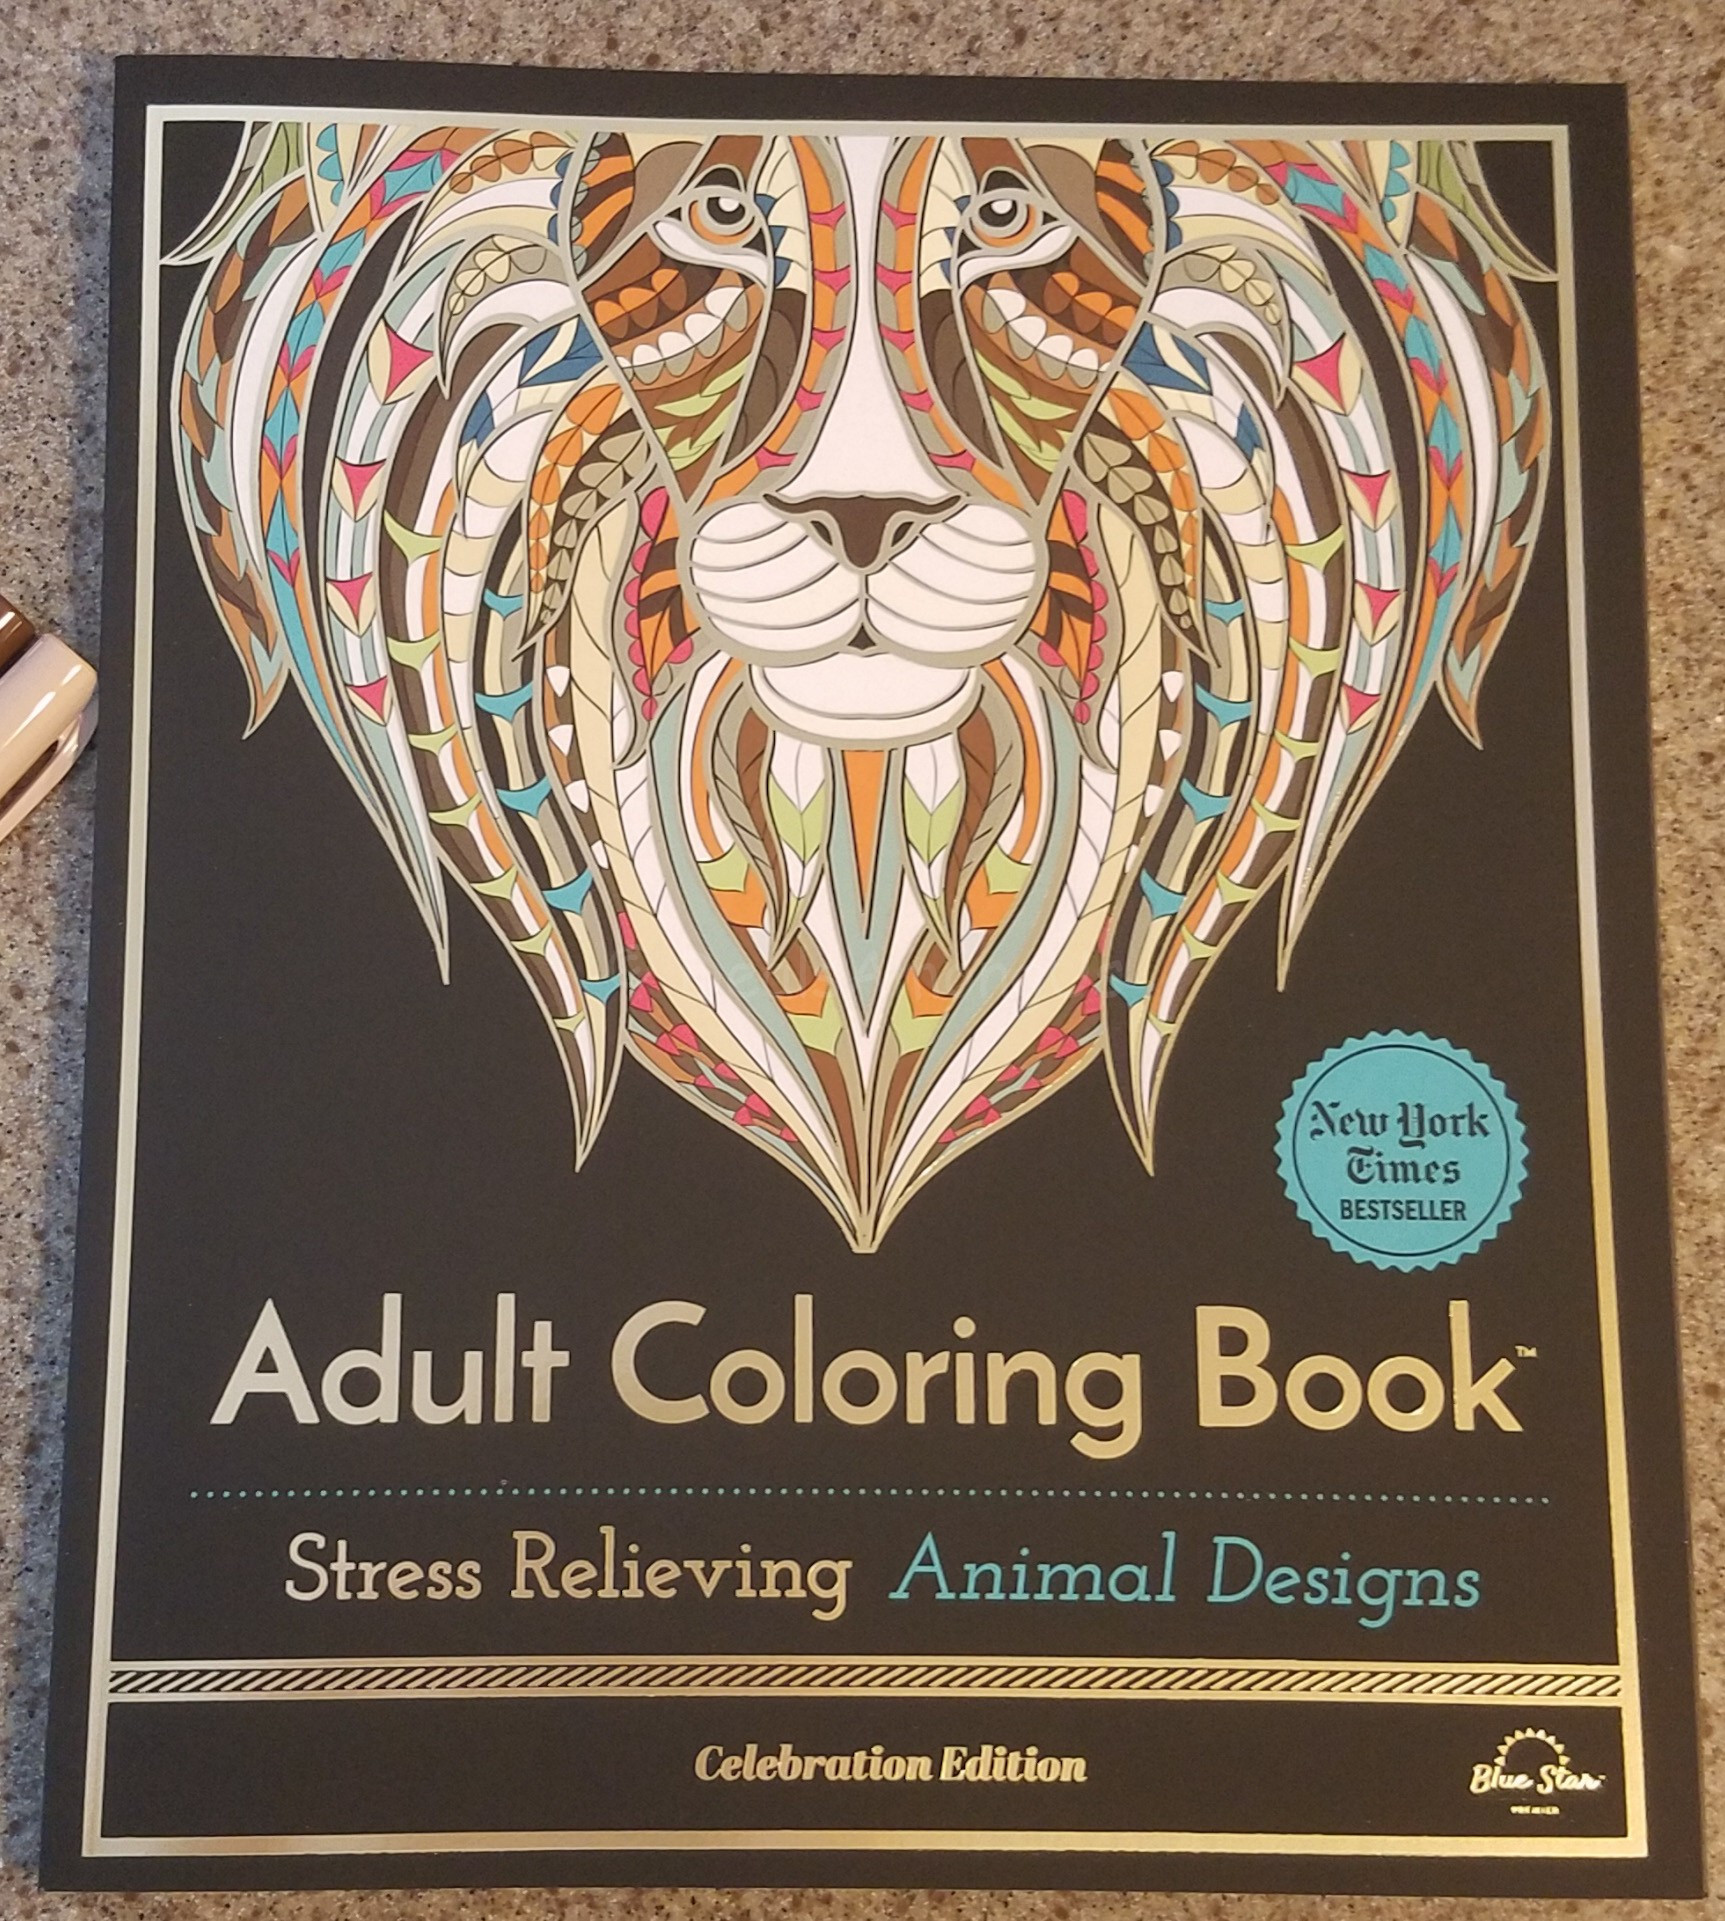 Adult Coloring Book Stress Relieving Animal Designs
 DealsAmongUs